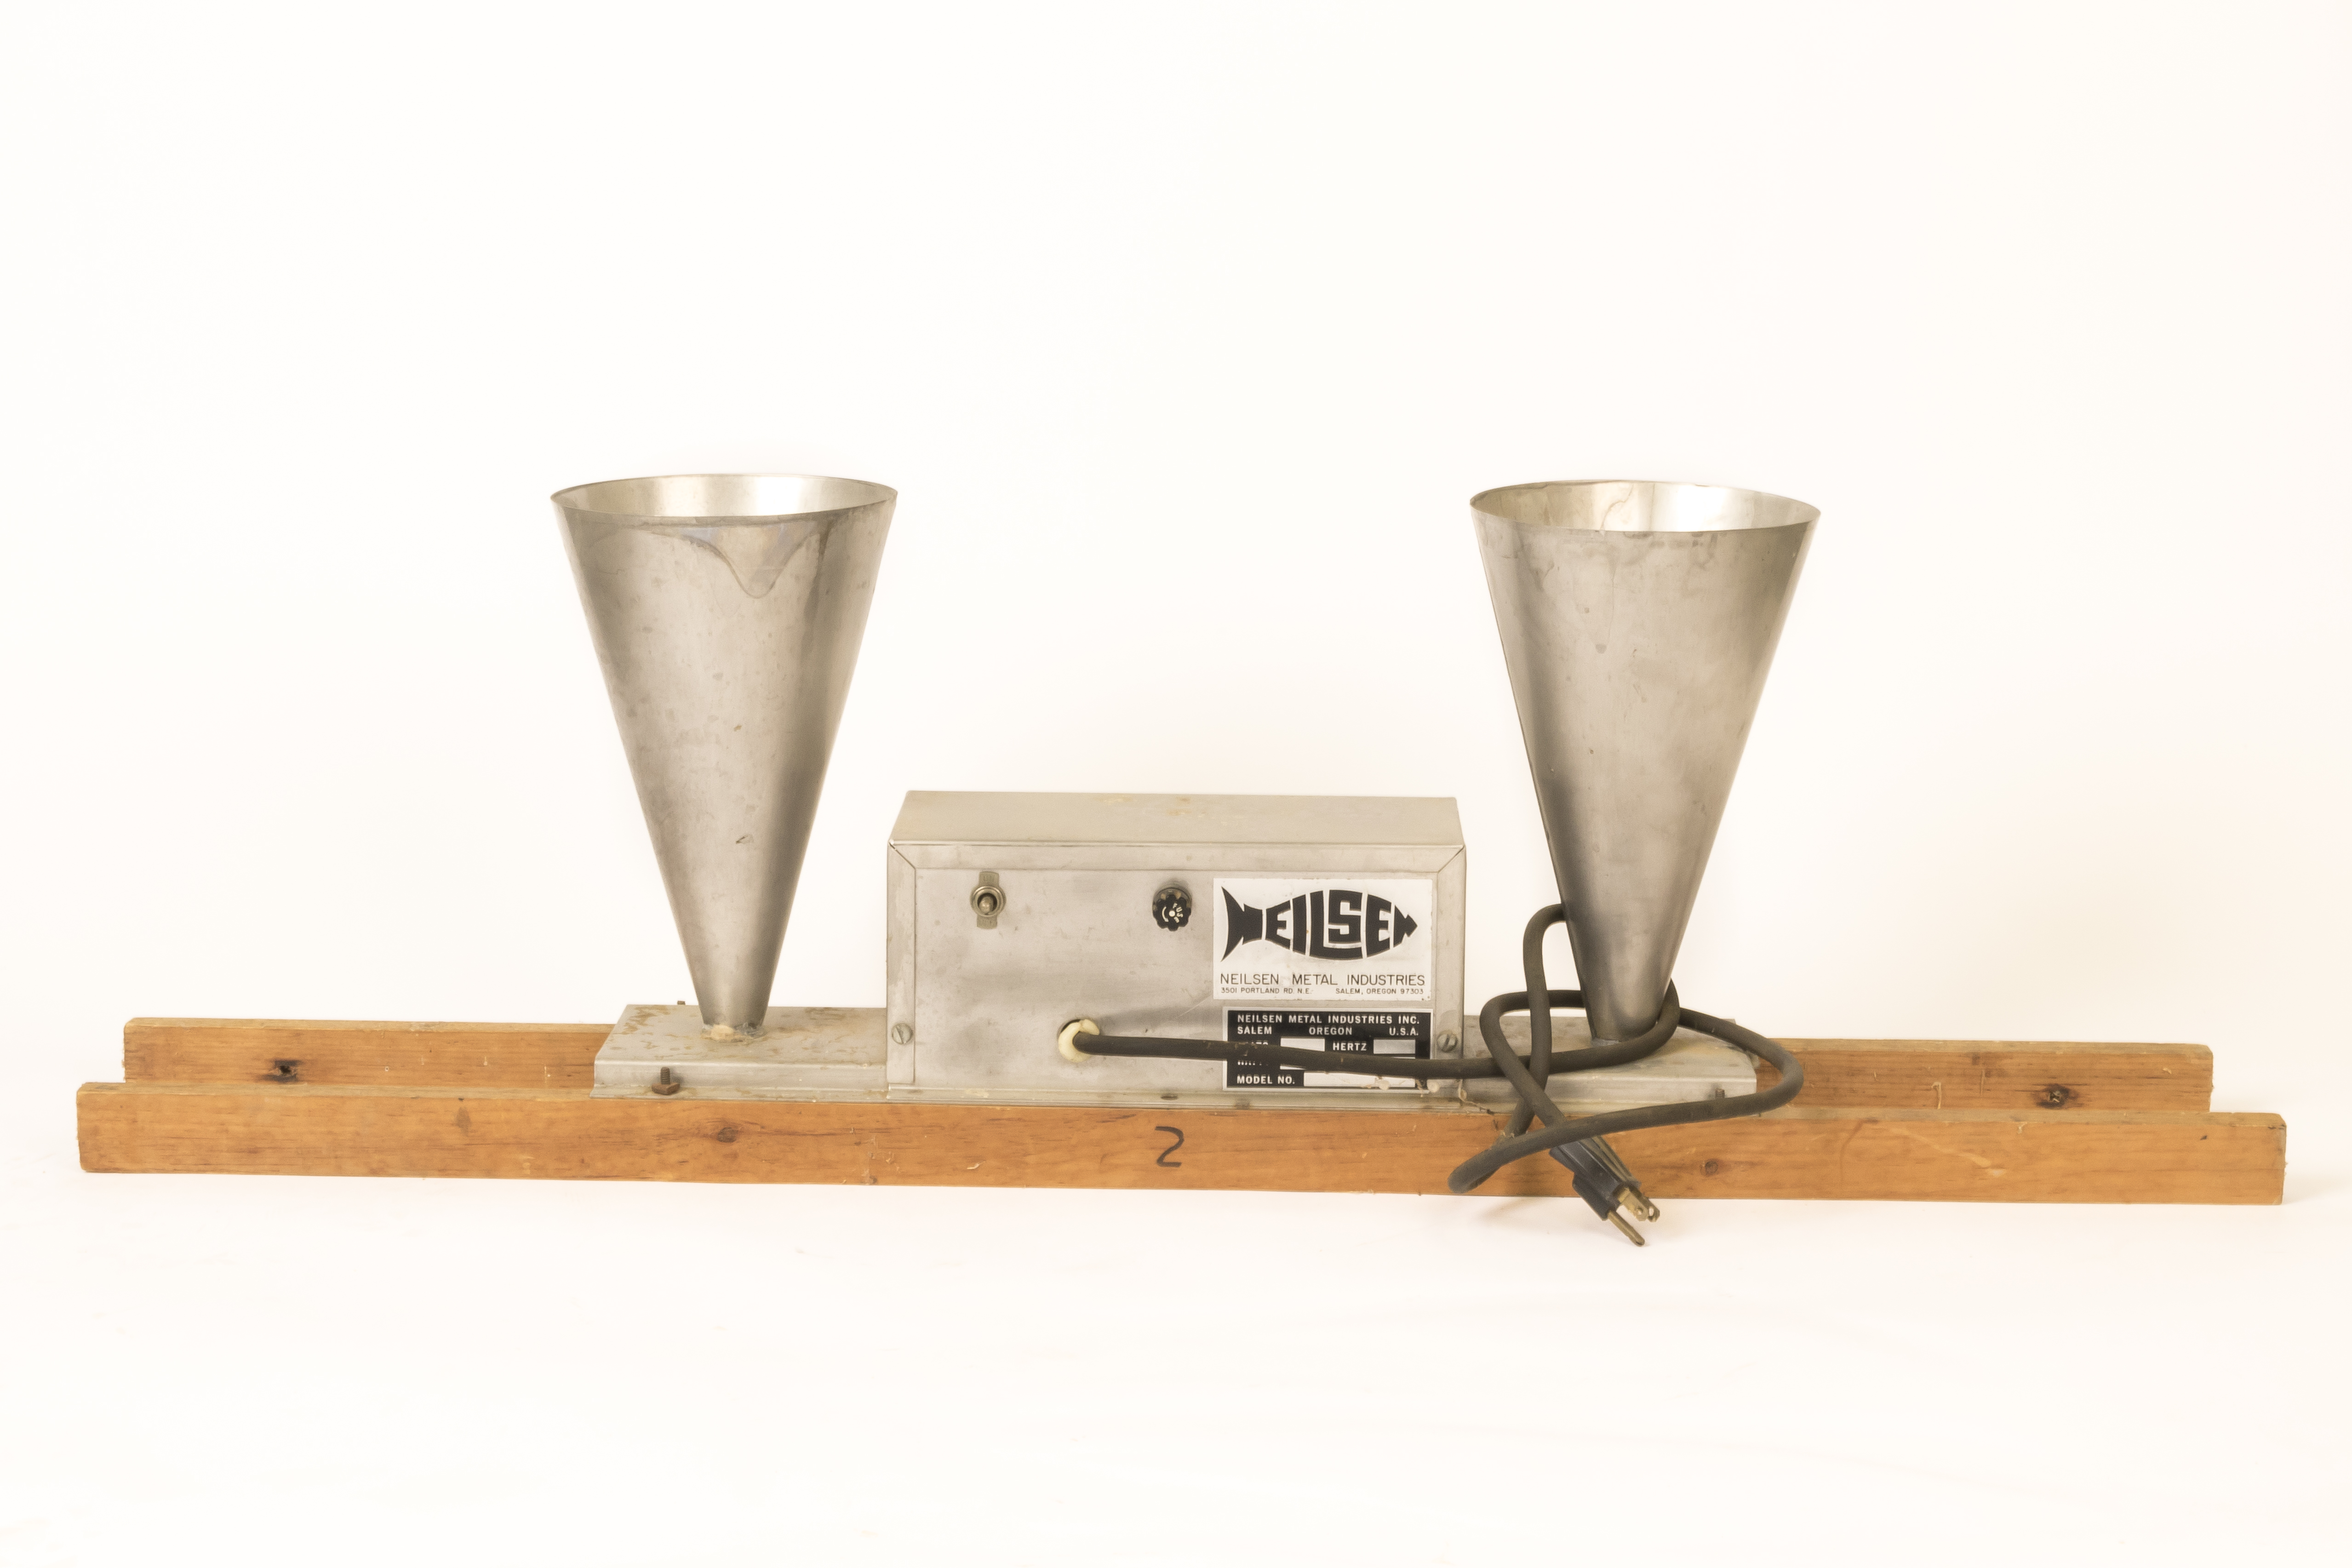 A grey metal Neilsen automatic fish food feeder photographed on a white background.